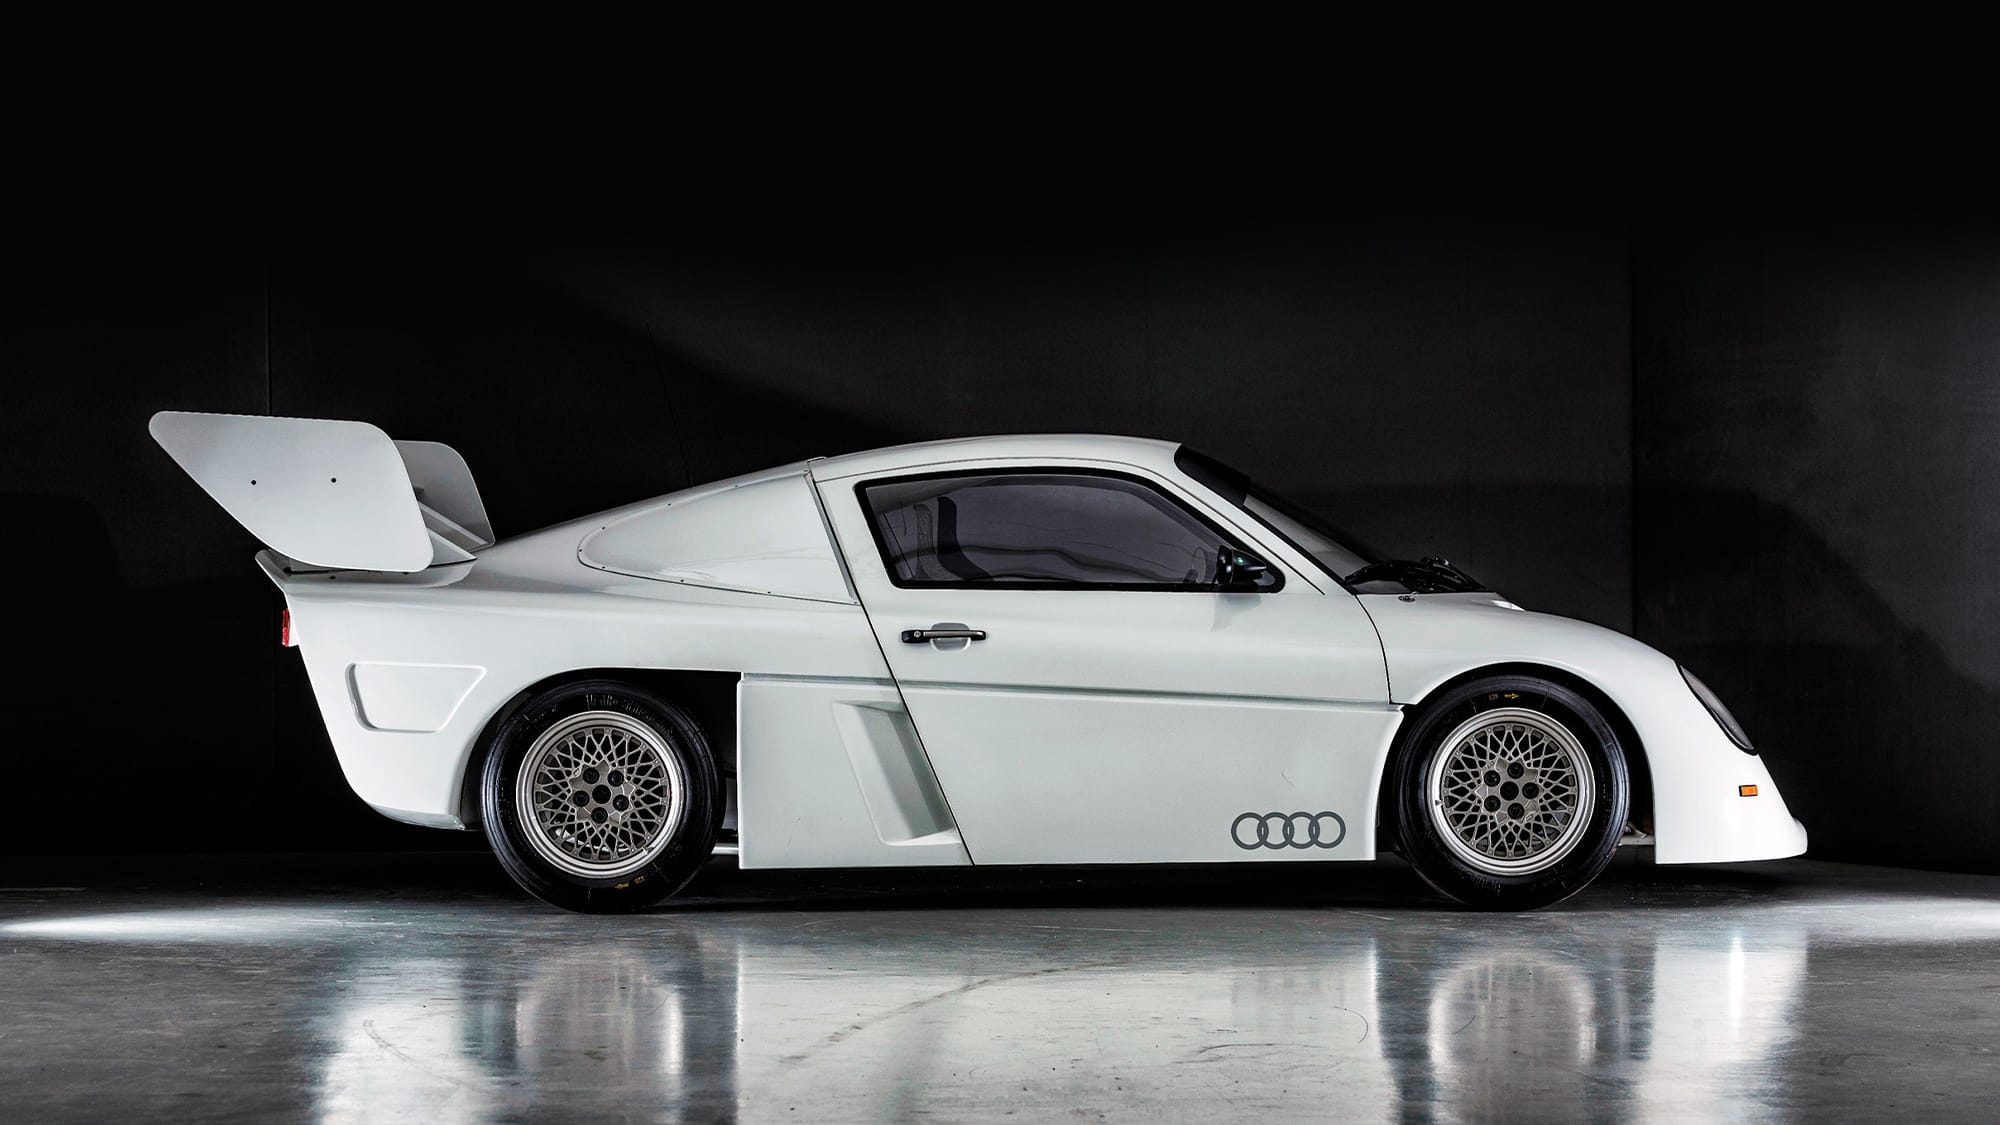 Audi Quattro RS002 unraced rally car